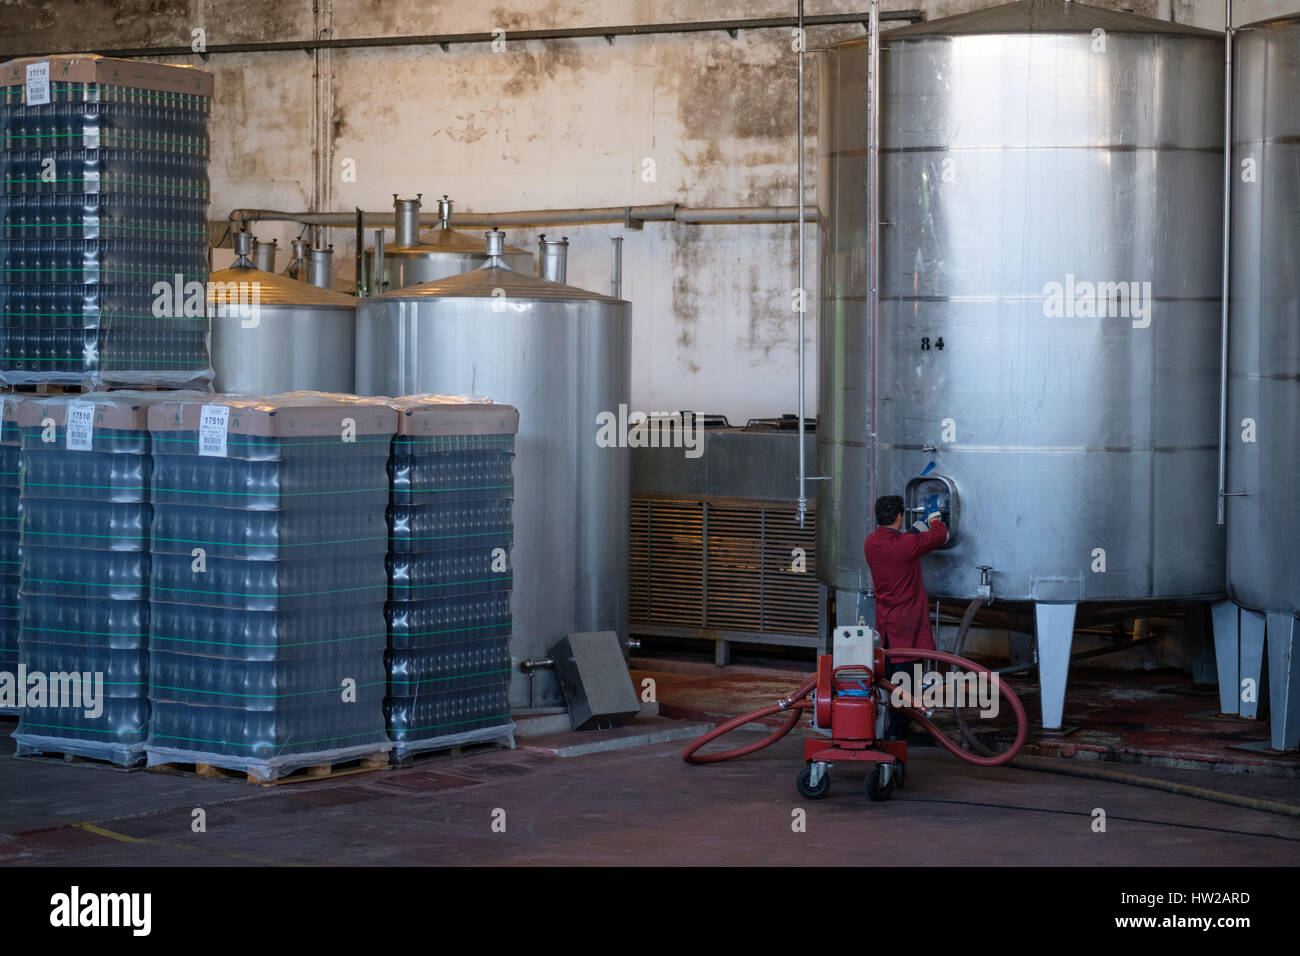 Stainless steel vats for wine fermentation at Caves Primavera in the Bairrada region of Portugal, Europe Stock Photo